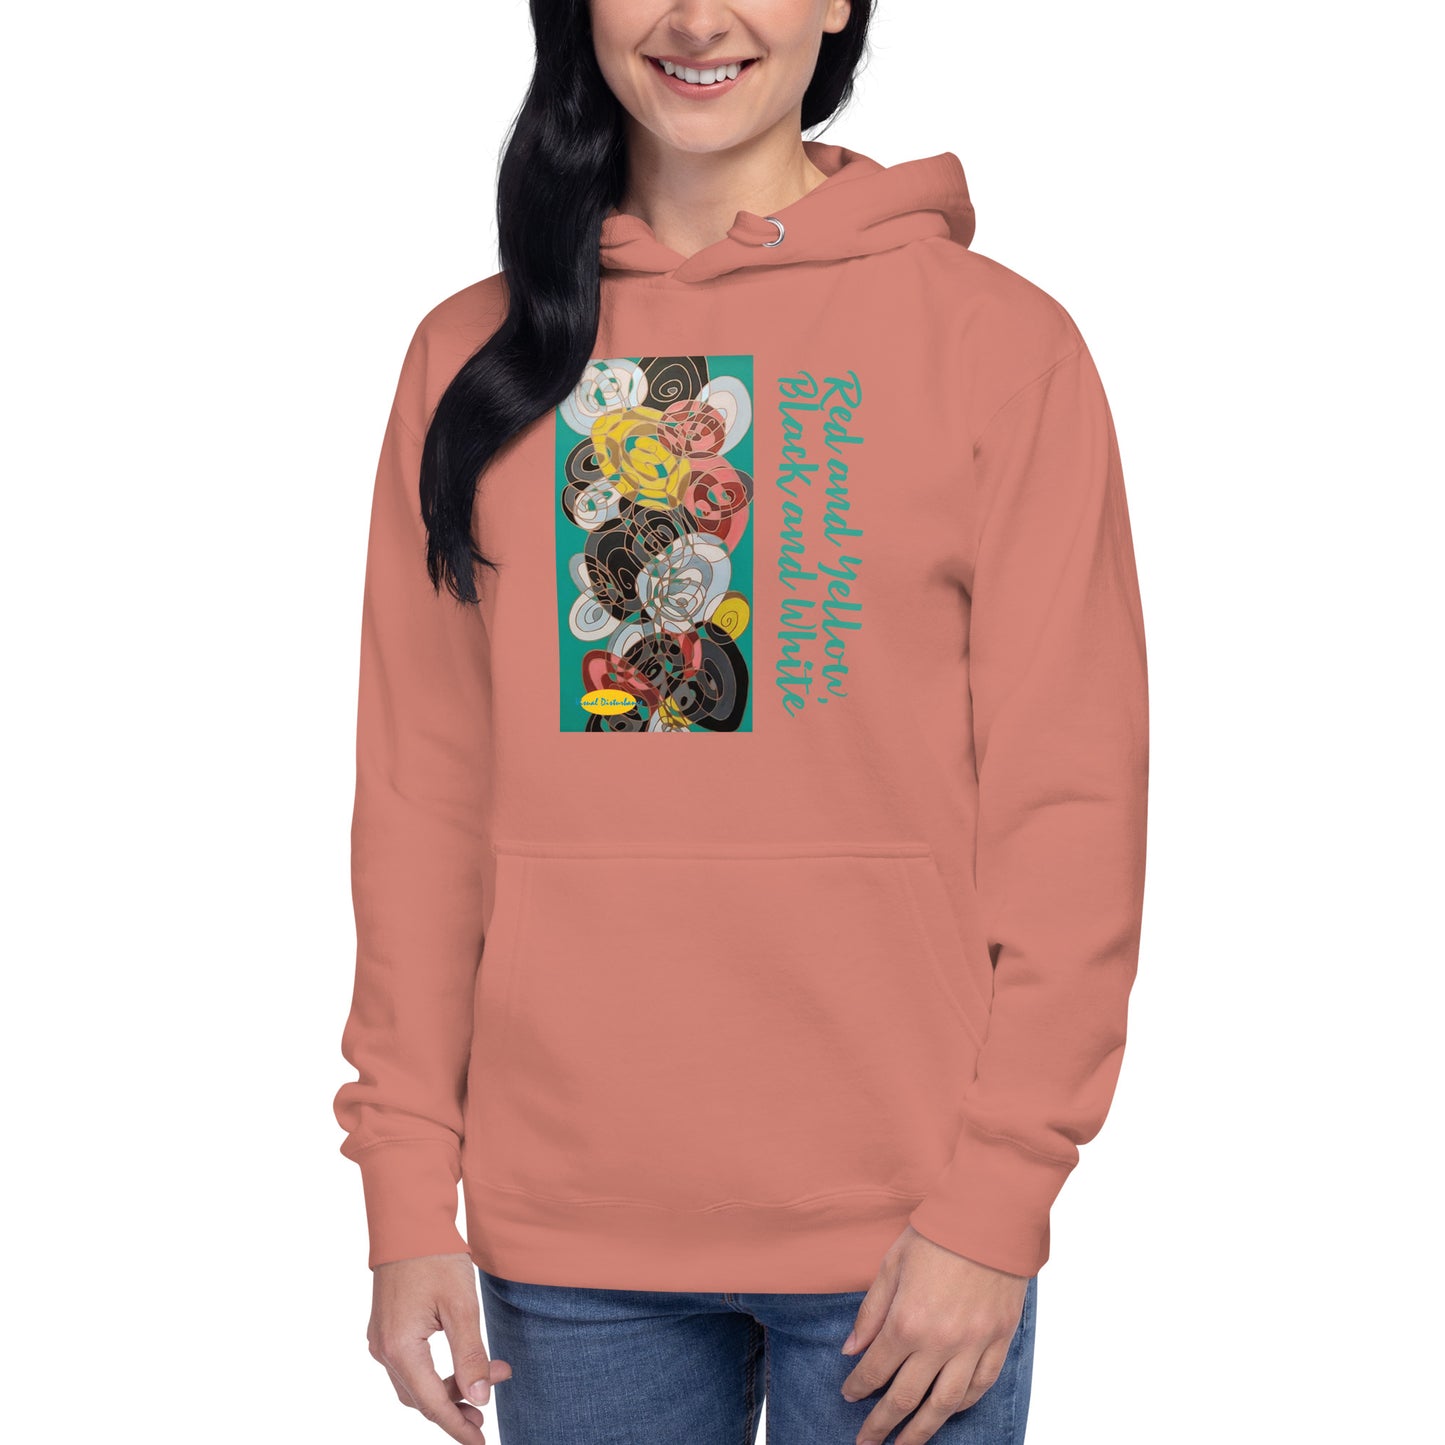 Red and Yellow, Black and White Unisex Hoodie